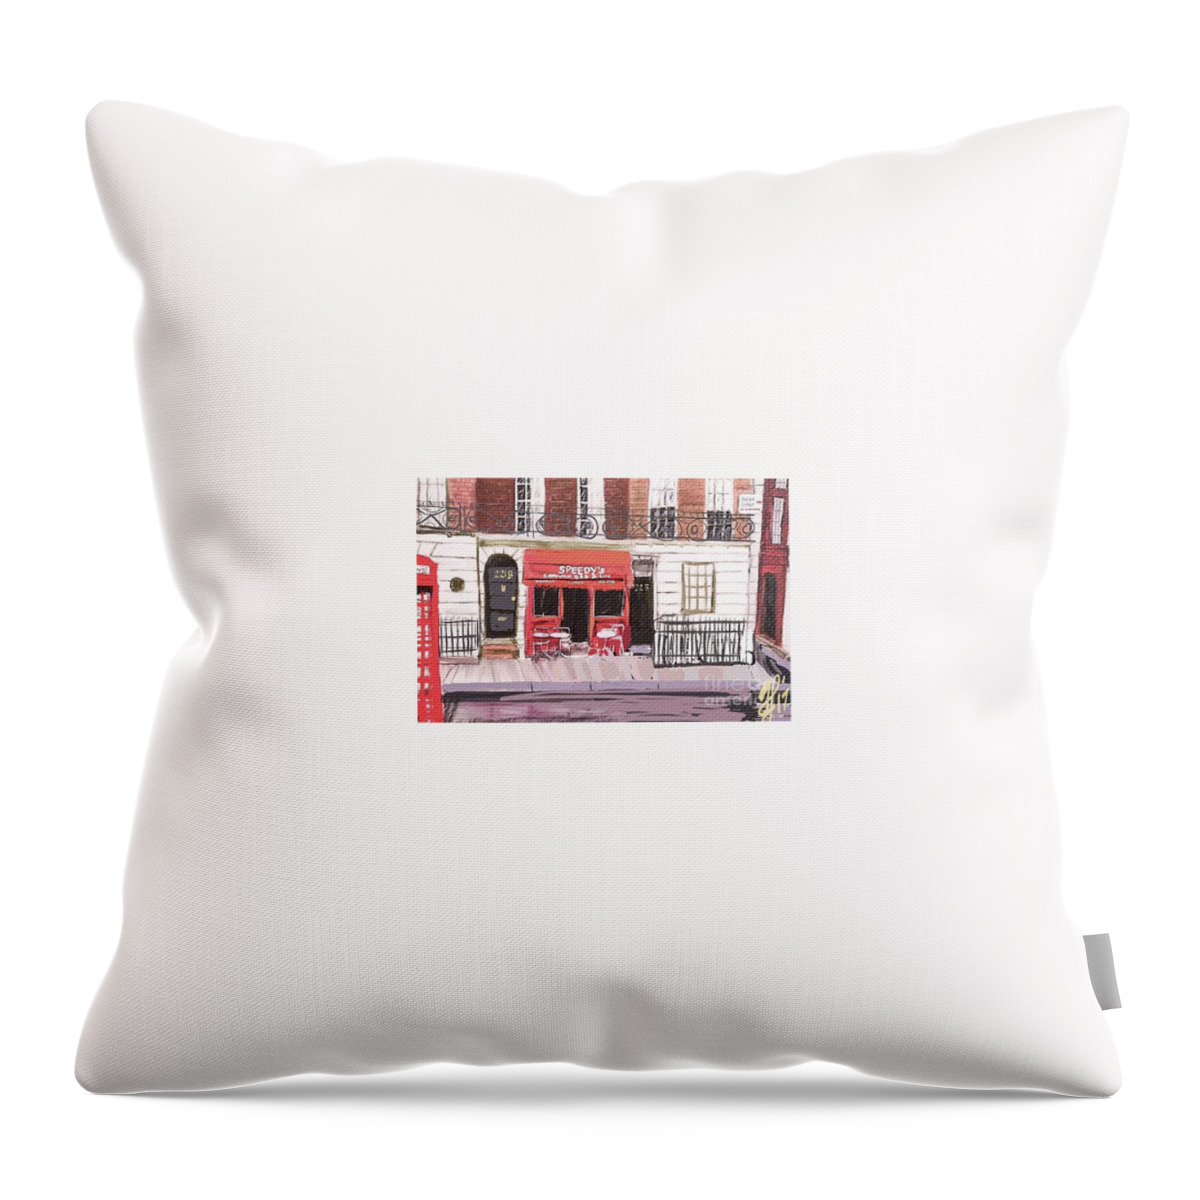  Throw Pillow featuring the painting 221 B Baker Street by Francois Lamothe